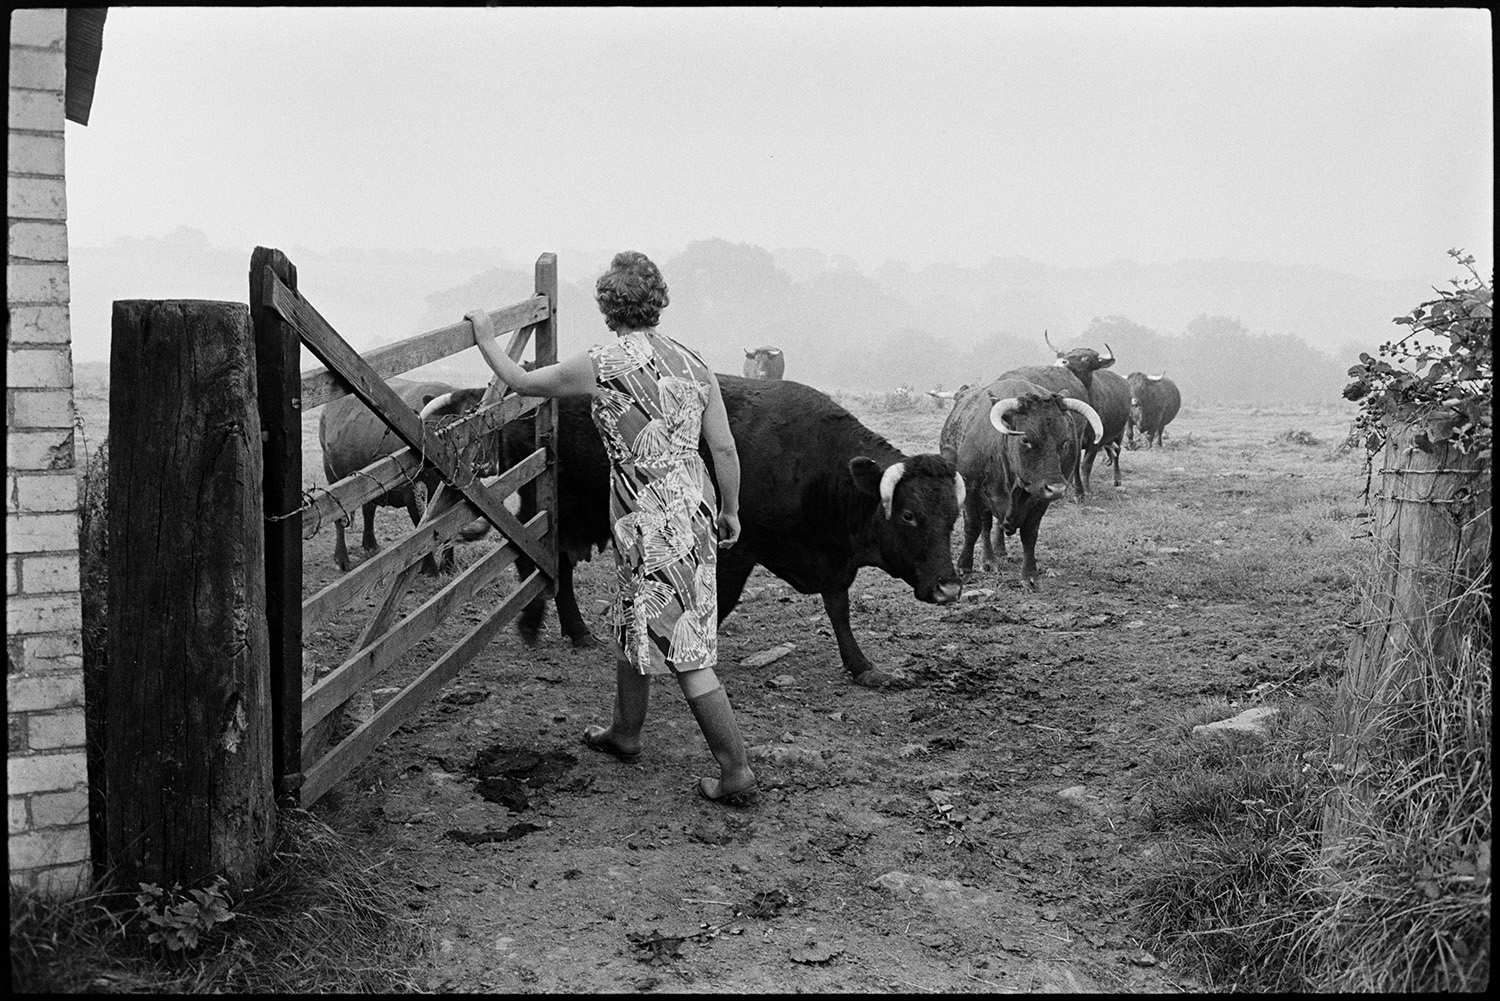 Horned Devon Red cows coming into farmyard to be milked.
[Mrs Elworthy opening a field gate to let horned Red Devon cows through to the farmyard to be milked at Narracott, Hollocombe.]